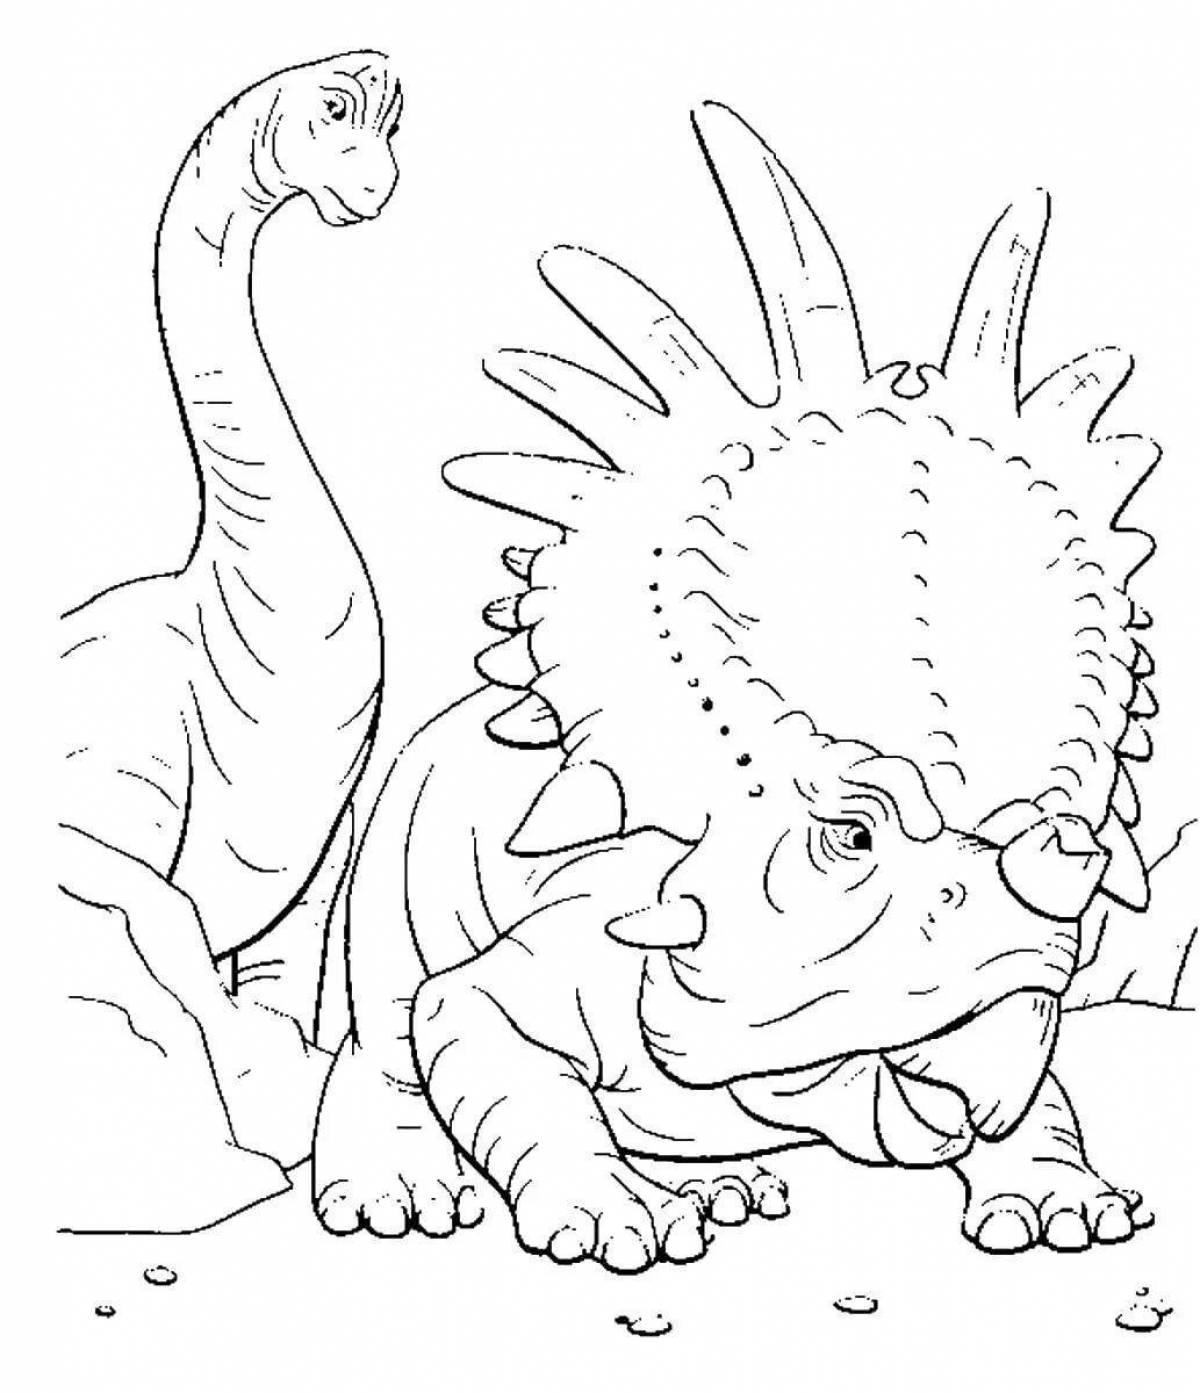 Great jurassic park coloring book for kids